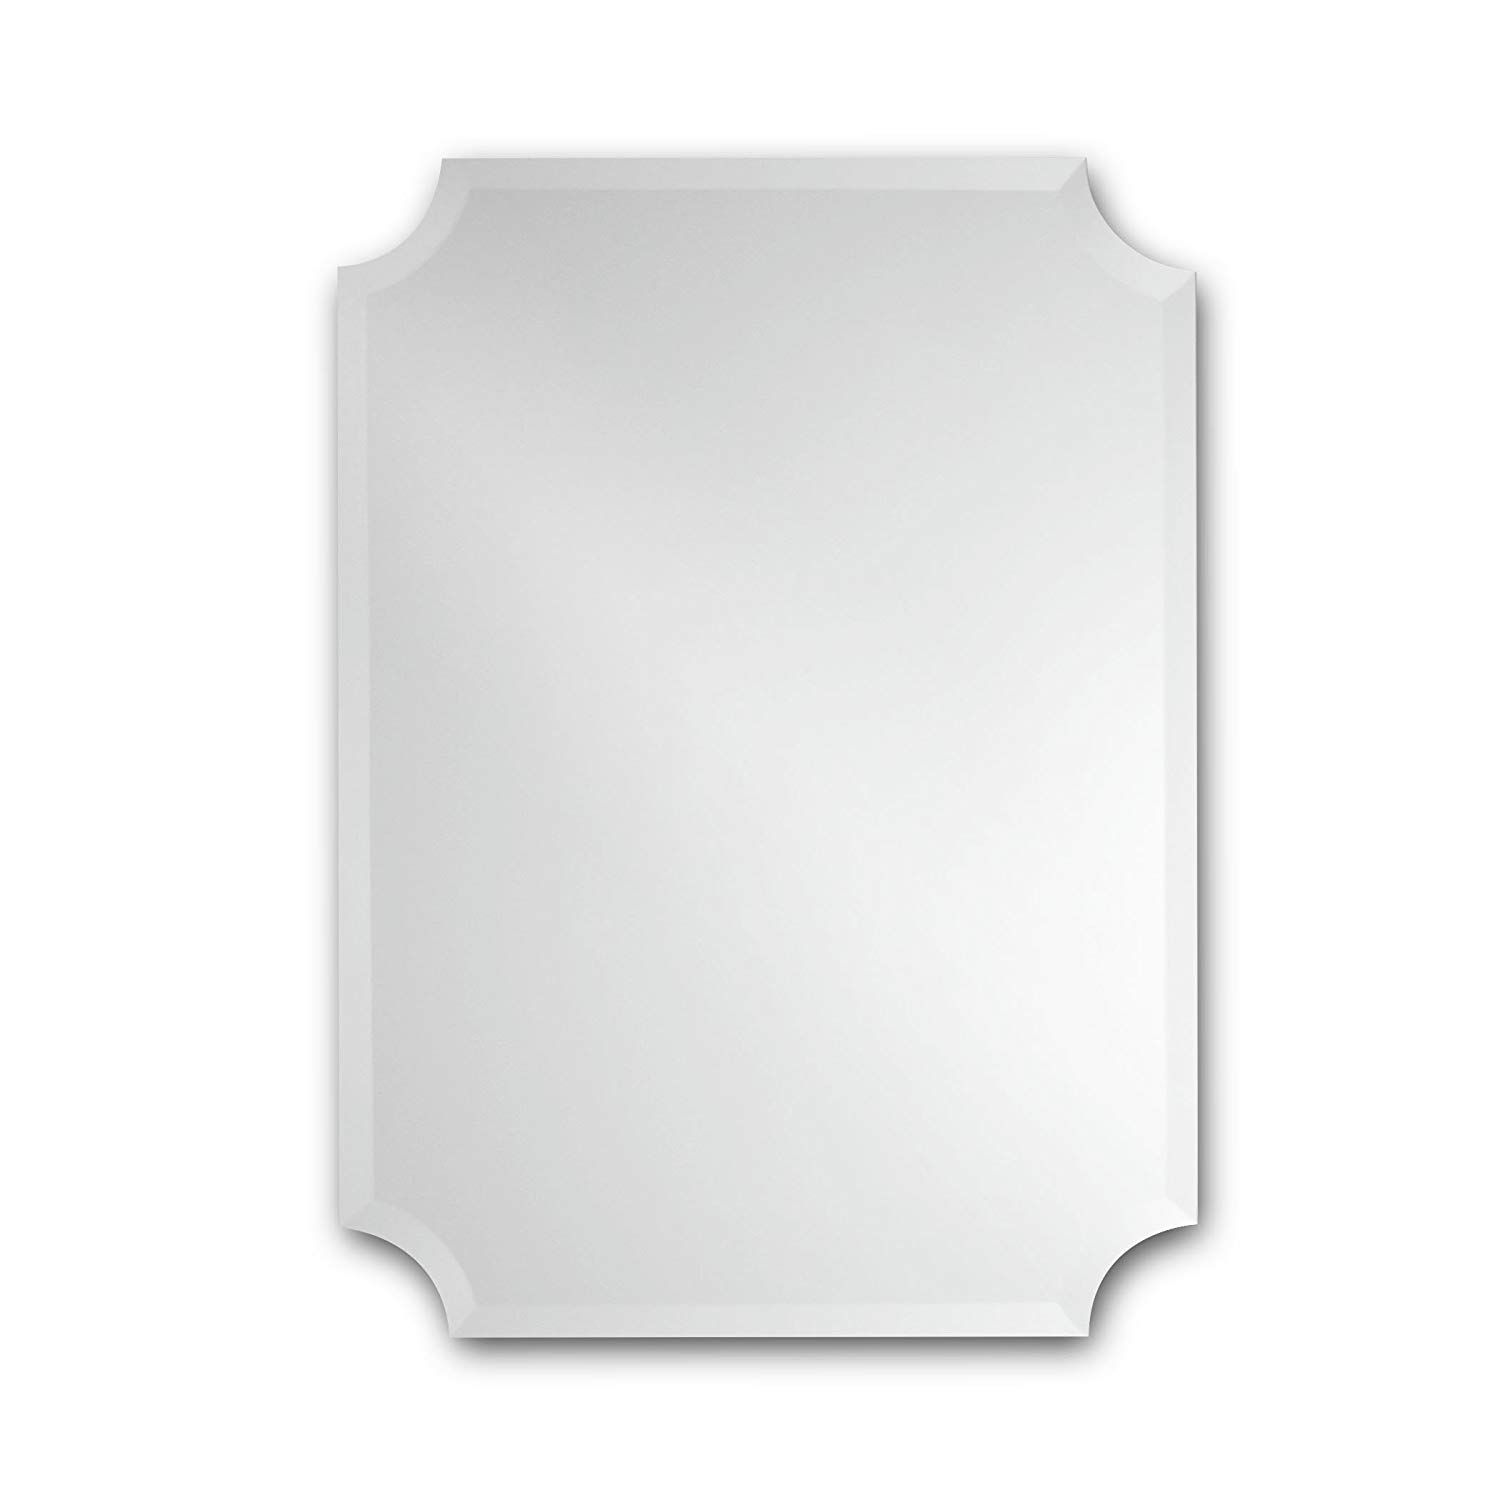 Buy The Better Bevel Round Frameless Wall Mirror | Bathroom, Vanity For Rounded Edge Rectangular Wall Mirrors (View 2 of 15)